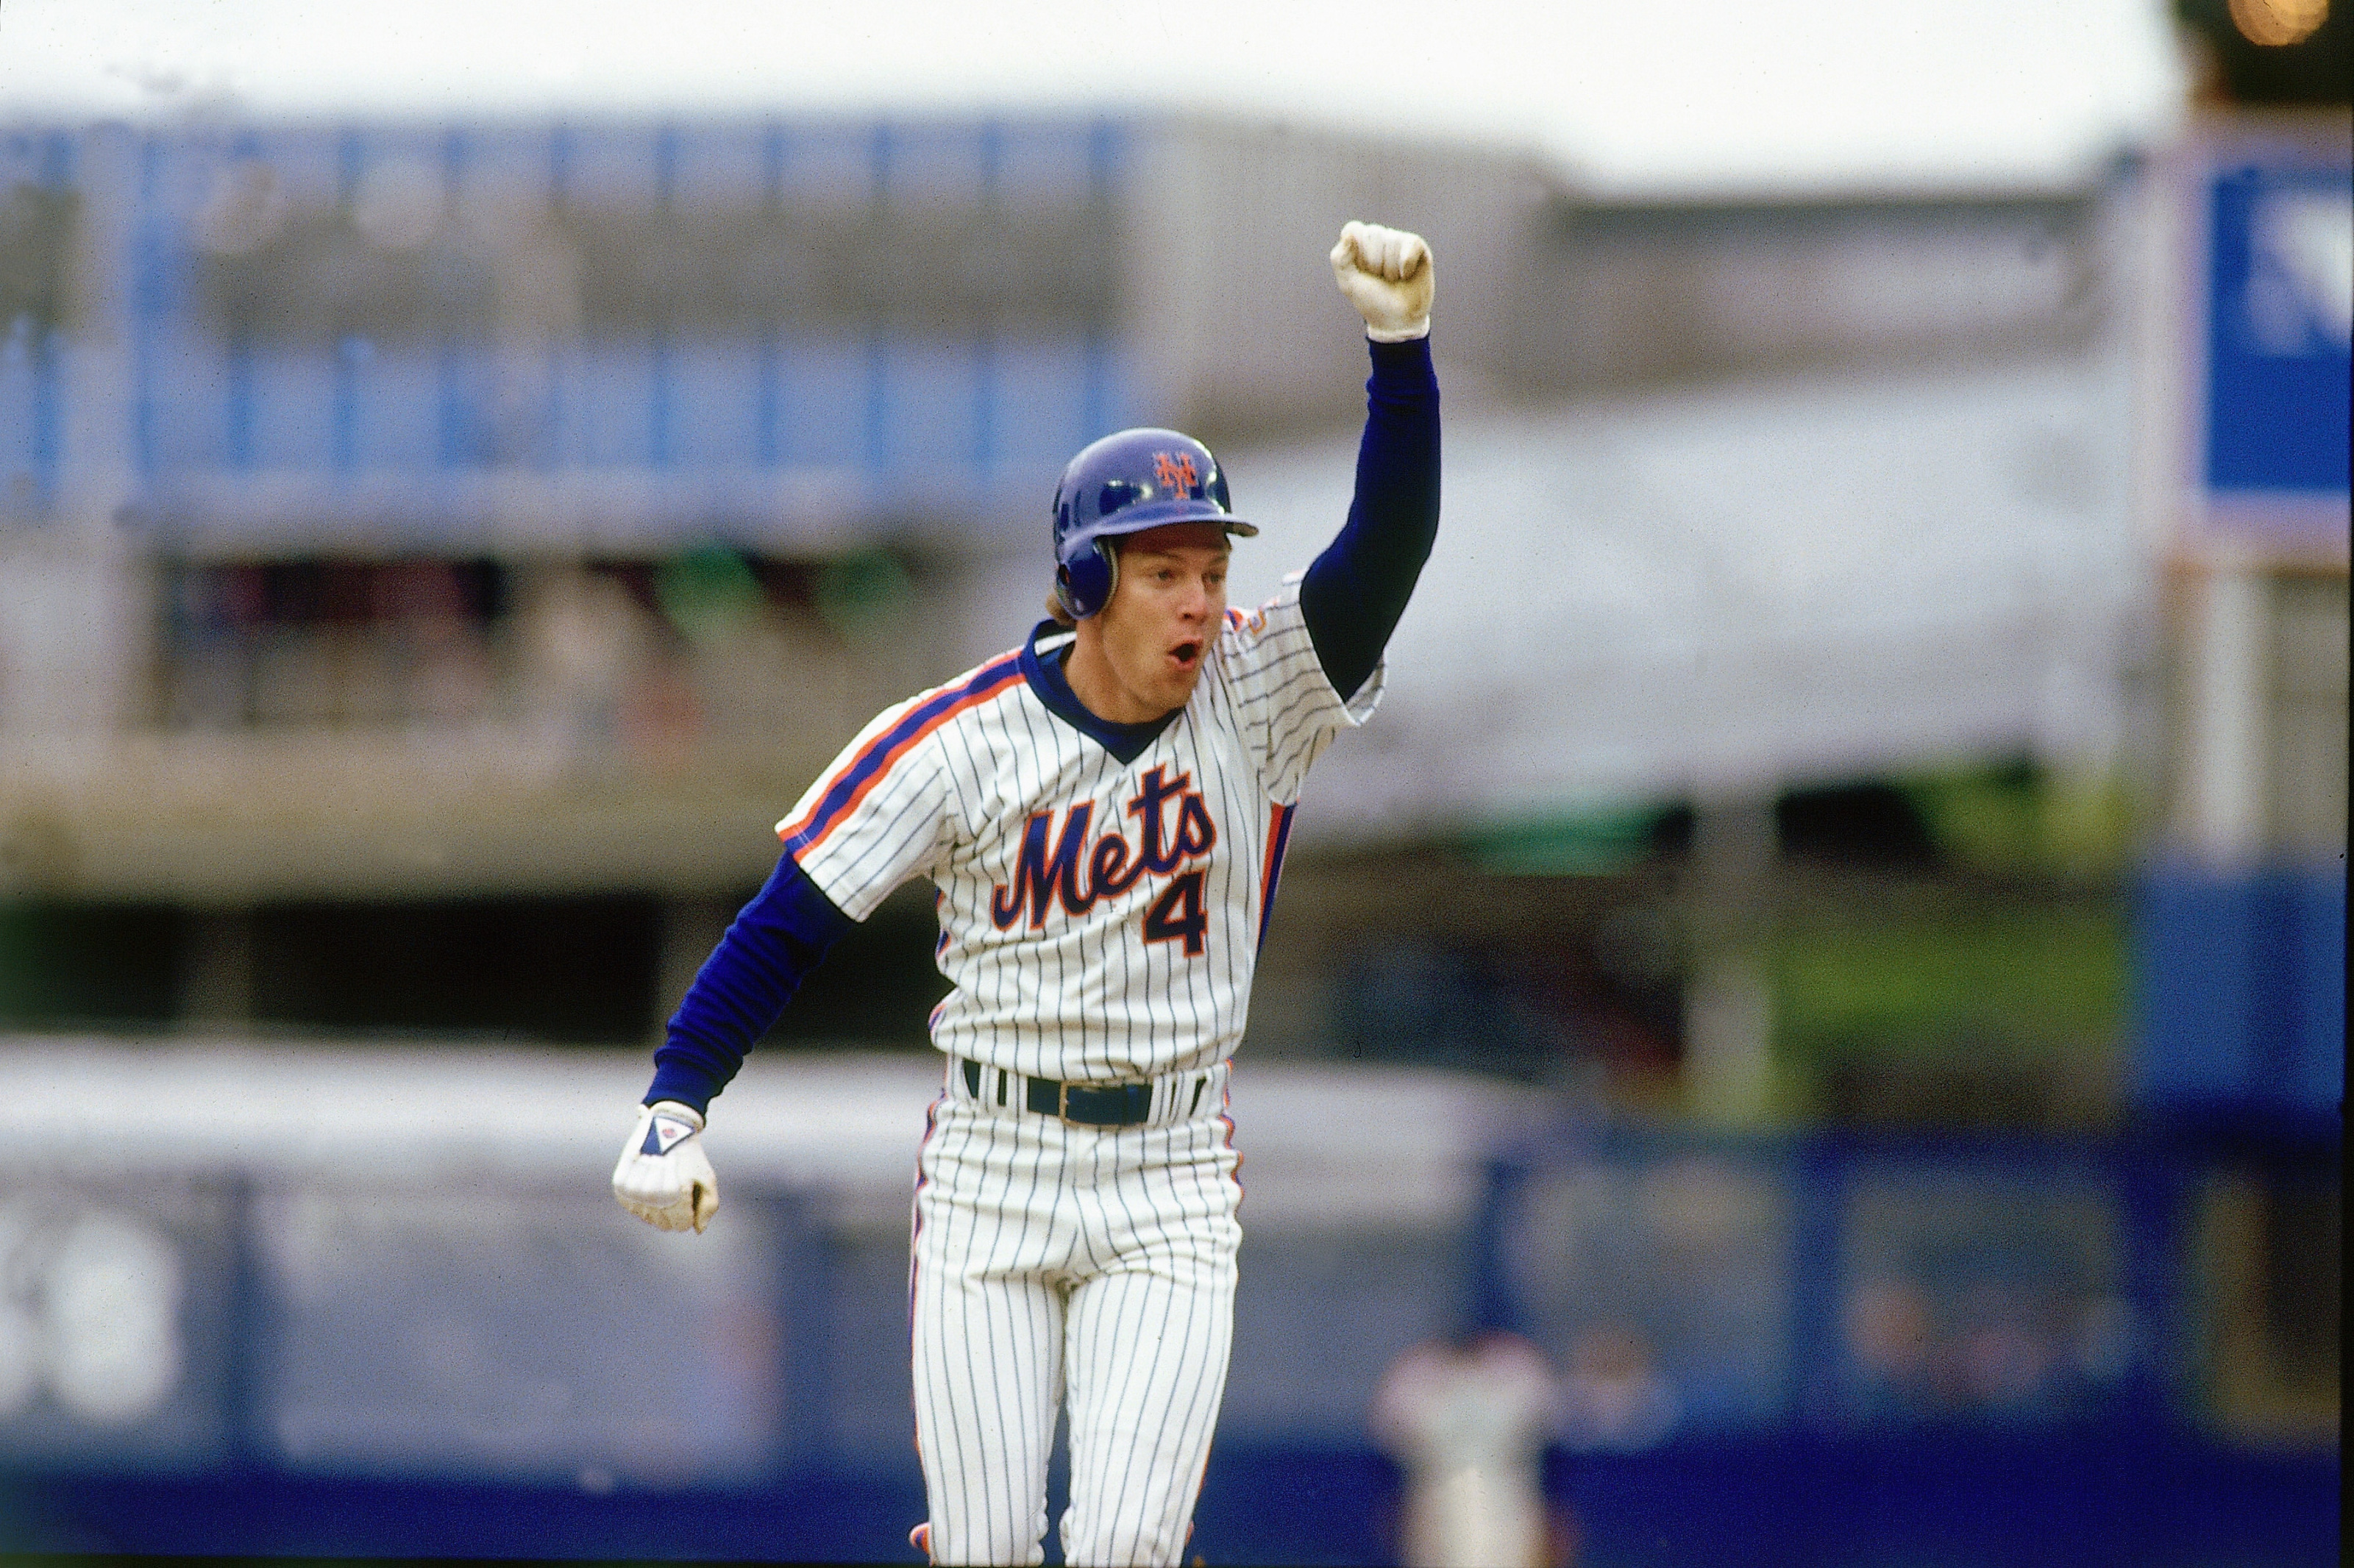 Lenny Dykstra sues former teammate Ron Darling over claims of